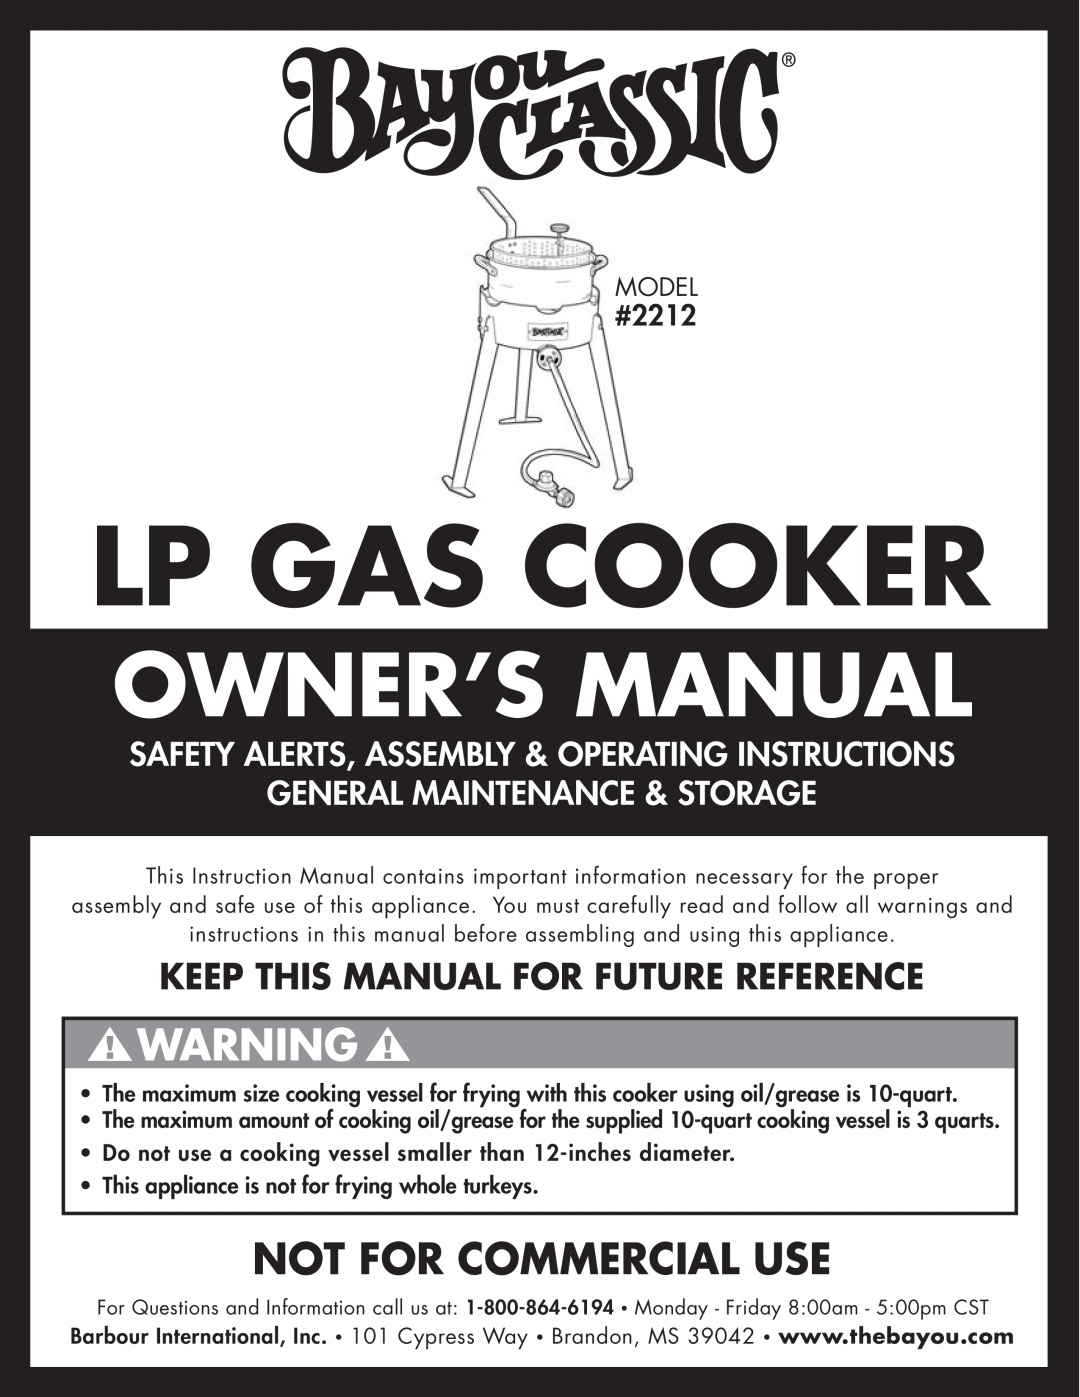 Bayou Classic owner manual Not For Commercial Use, Keep This Manual For Future Reference, Model, Lp Gas Cooker, #2212 